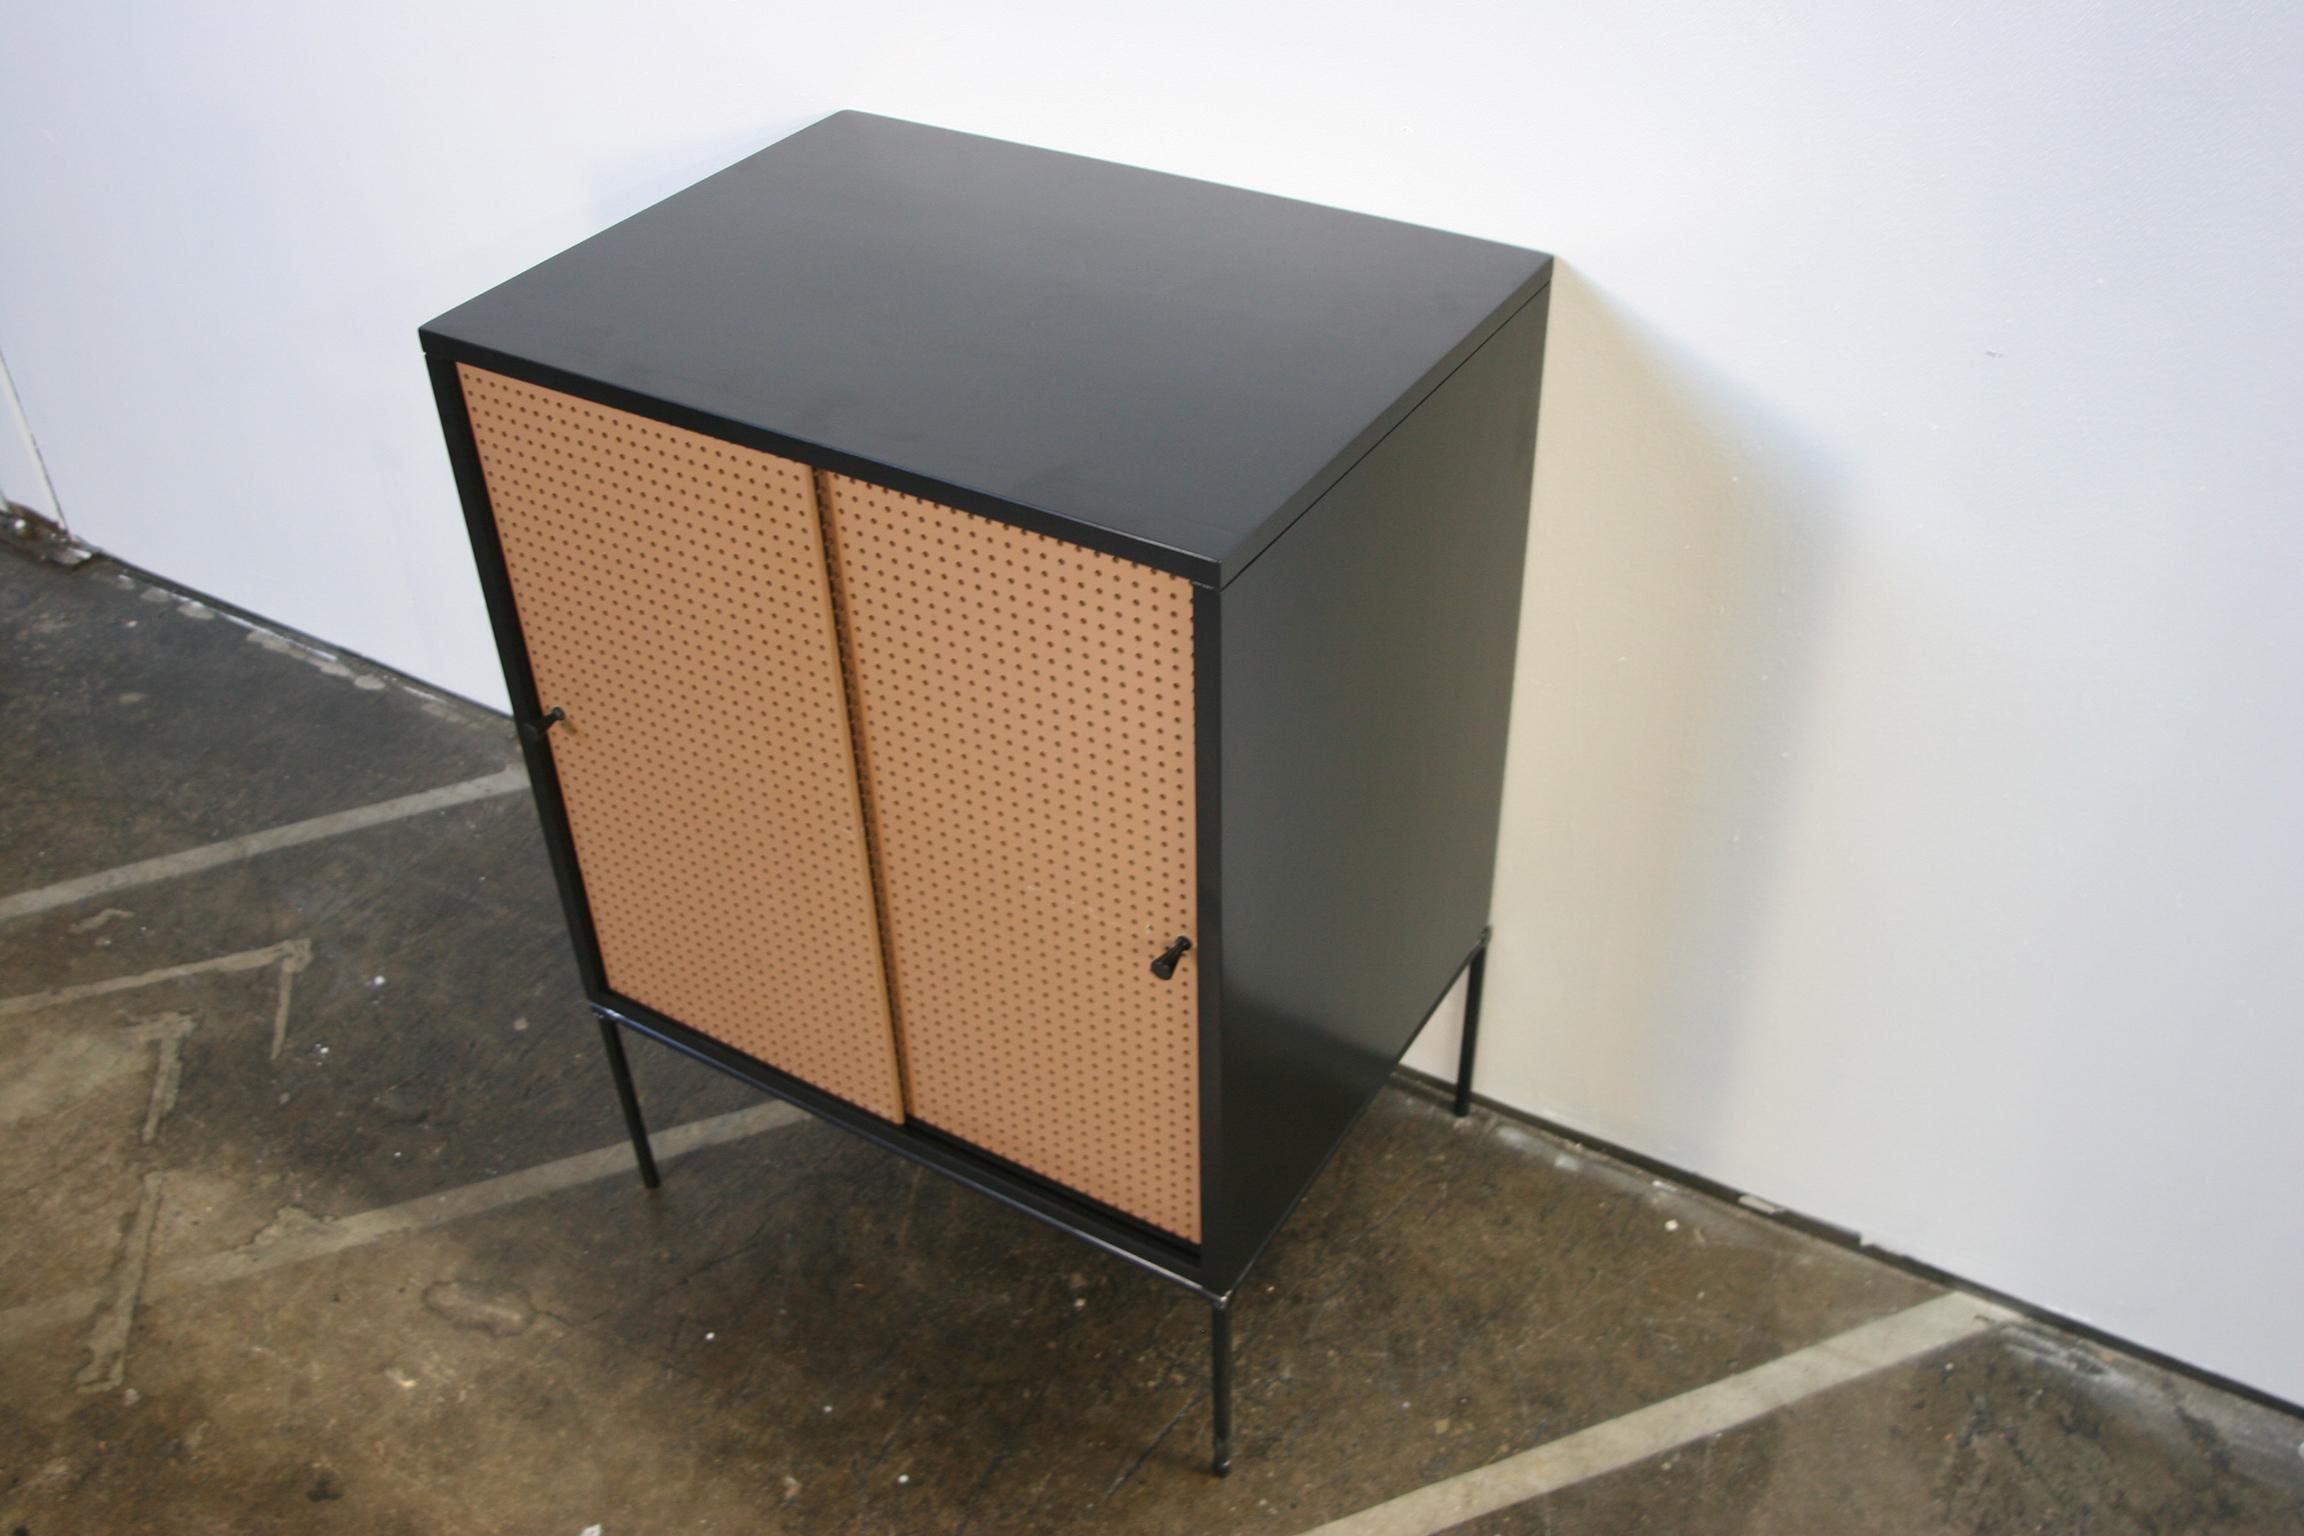 Mid-Century Modern Midcentury Small Cabinet by Paul McCobb circa 1950 Planner Group #1512 Black